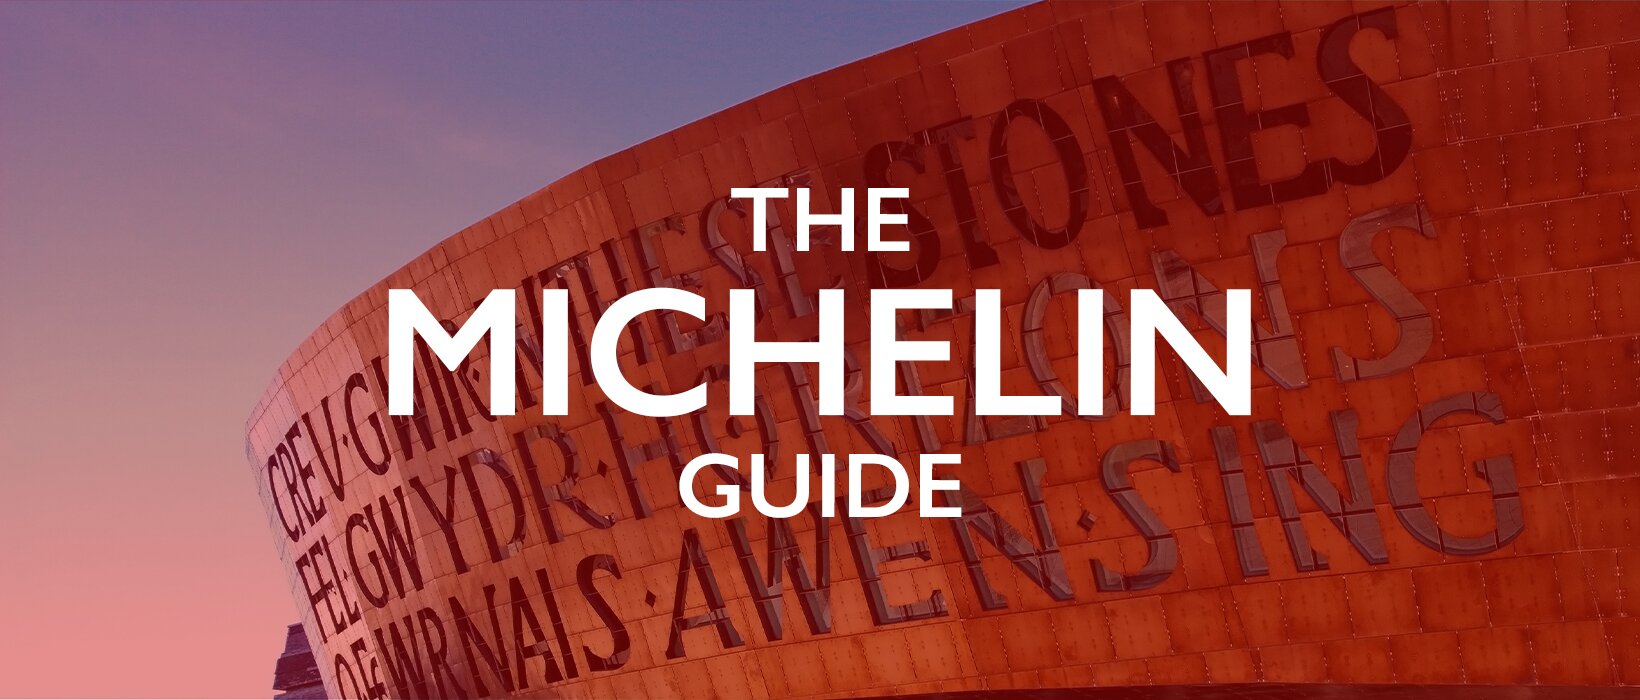 Every Michelin star restaurant in Wales